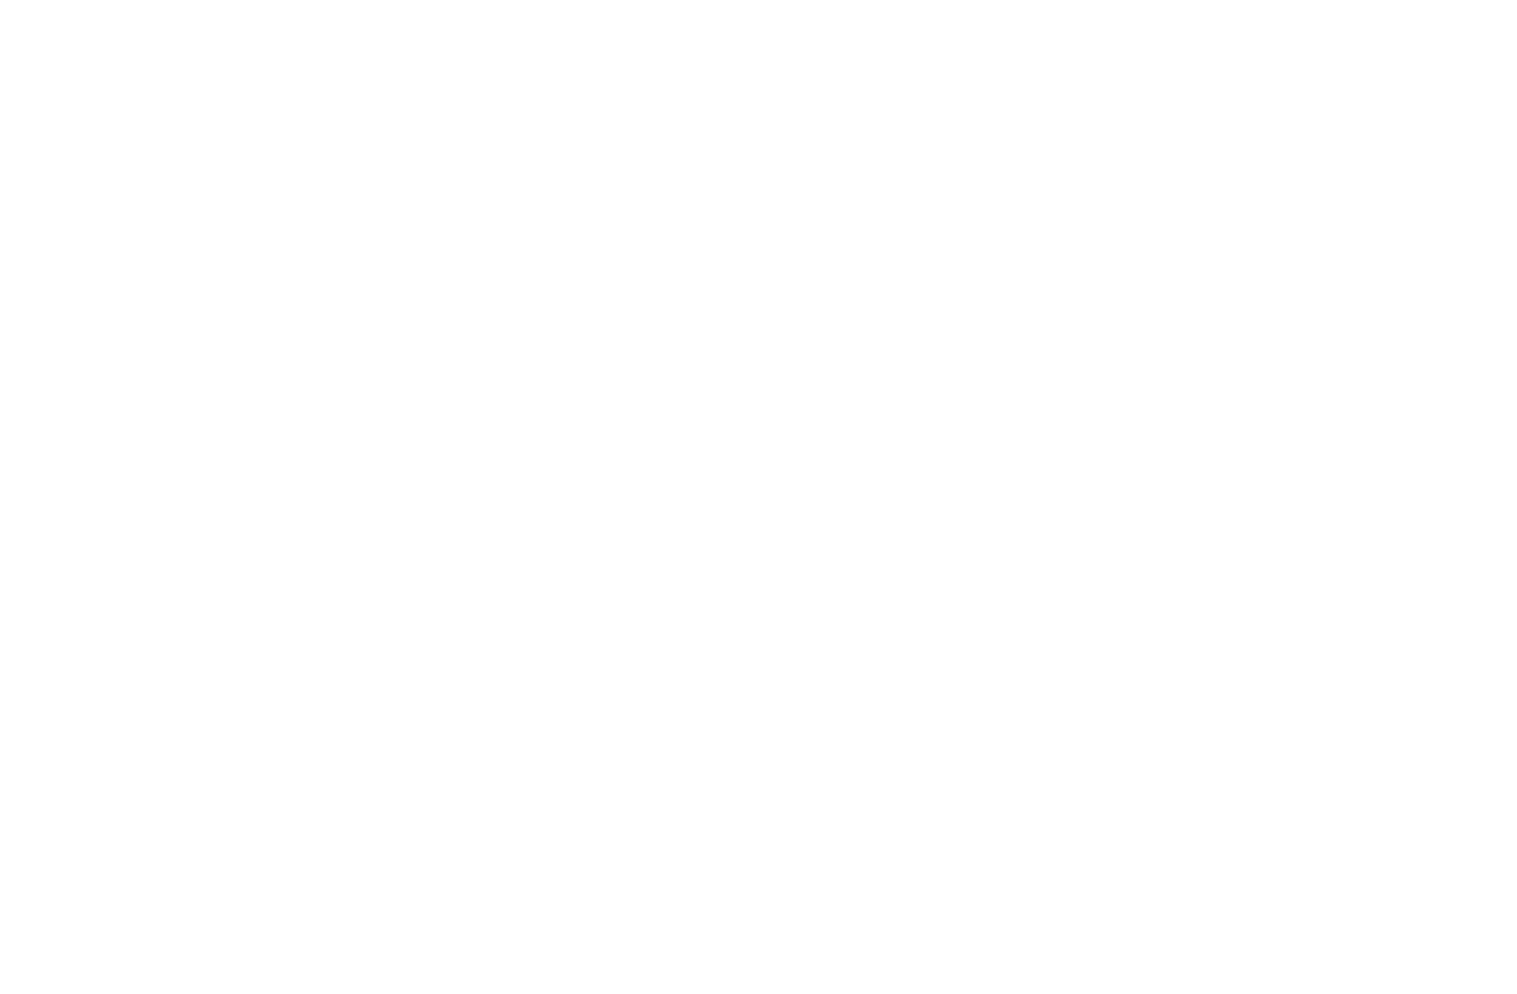 Council for World Jewry